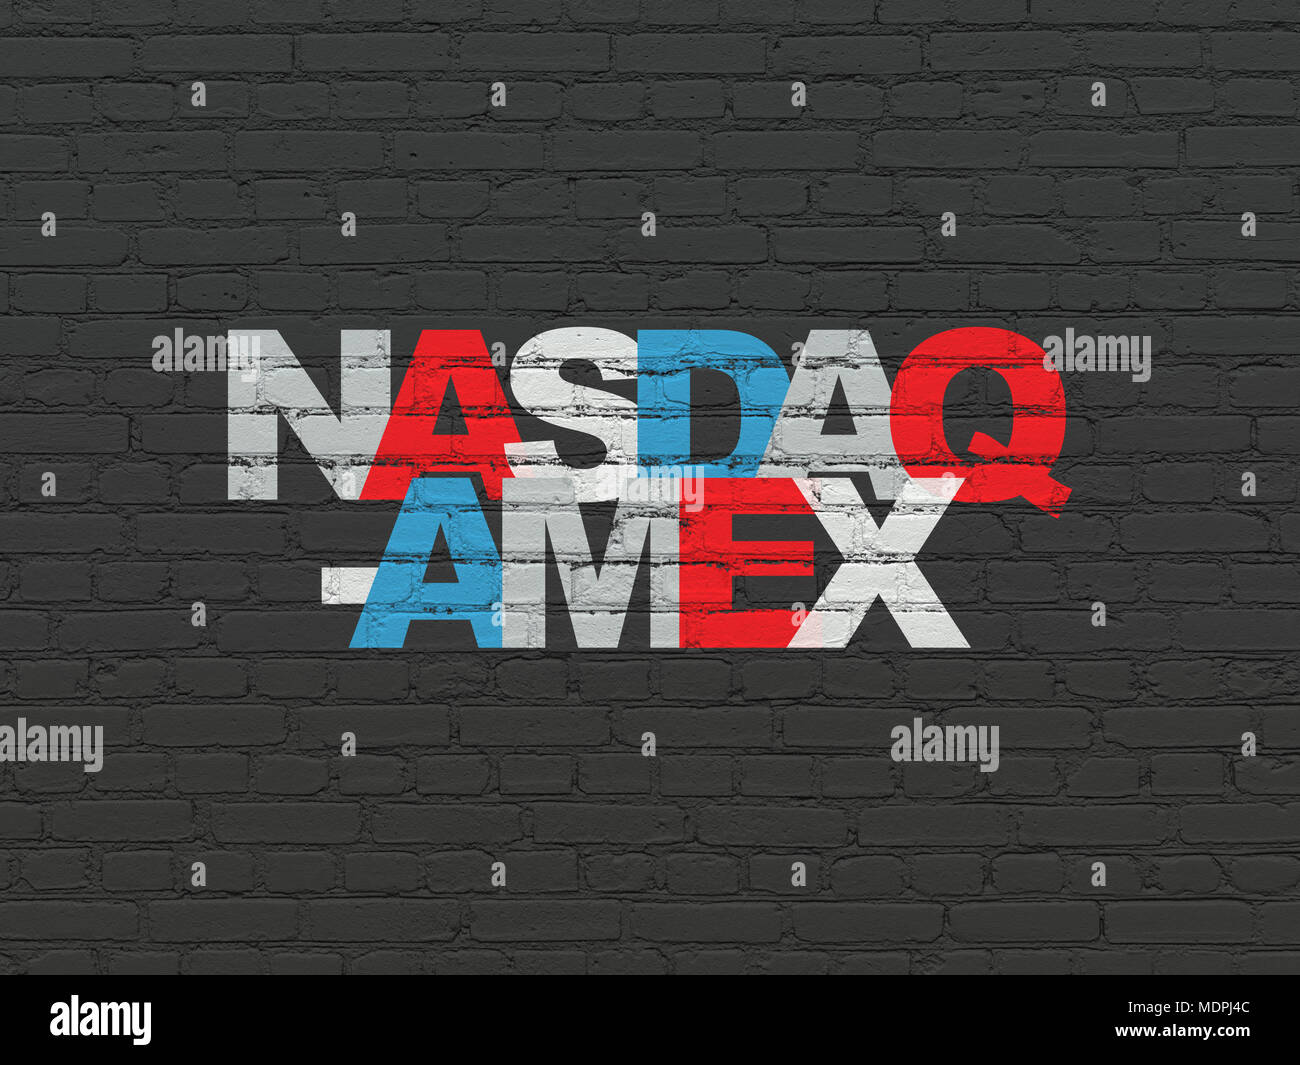 Stock market indexes concept: Painted multicolor text NASDAQ-AMEX on Black Brick wall background Stock Photo